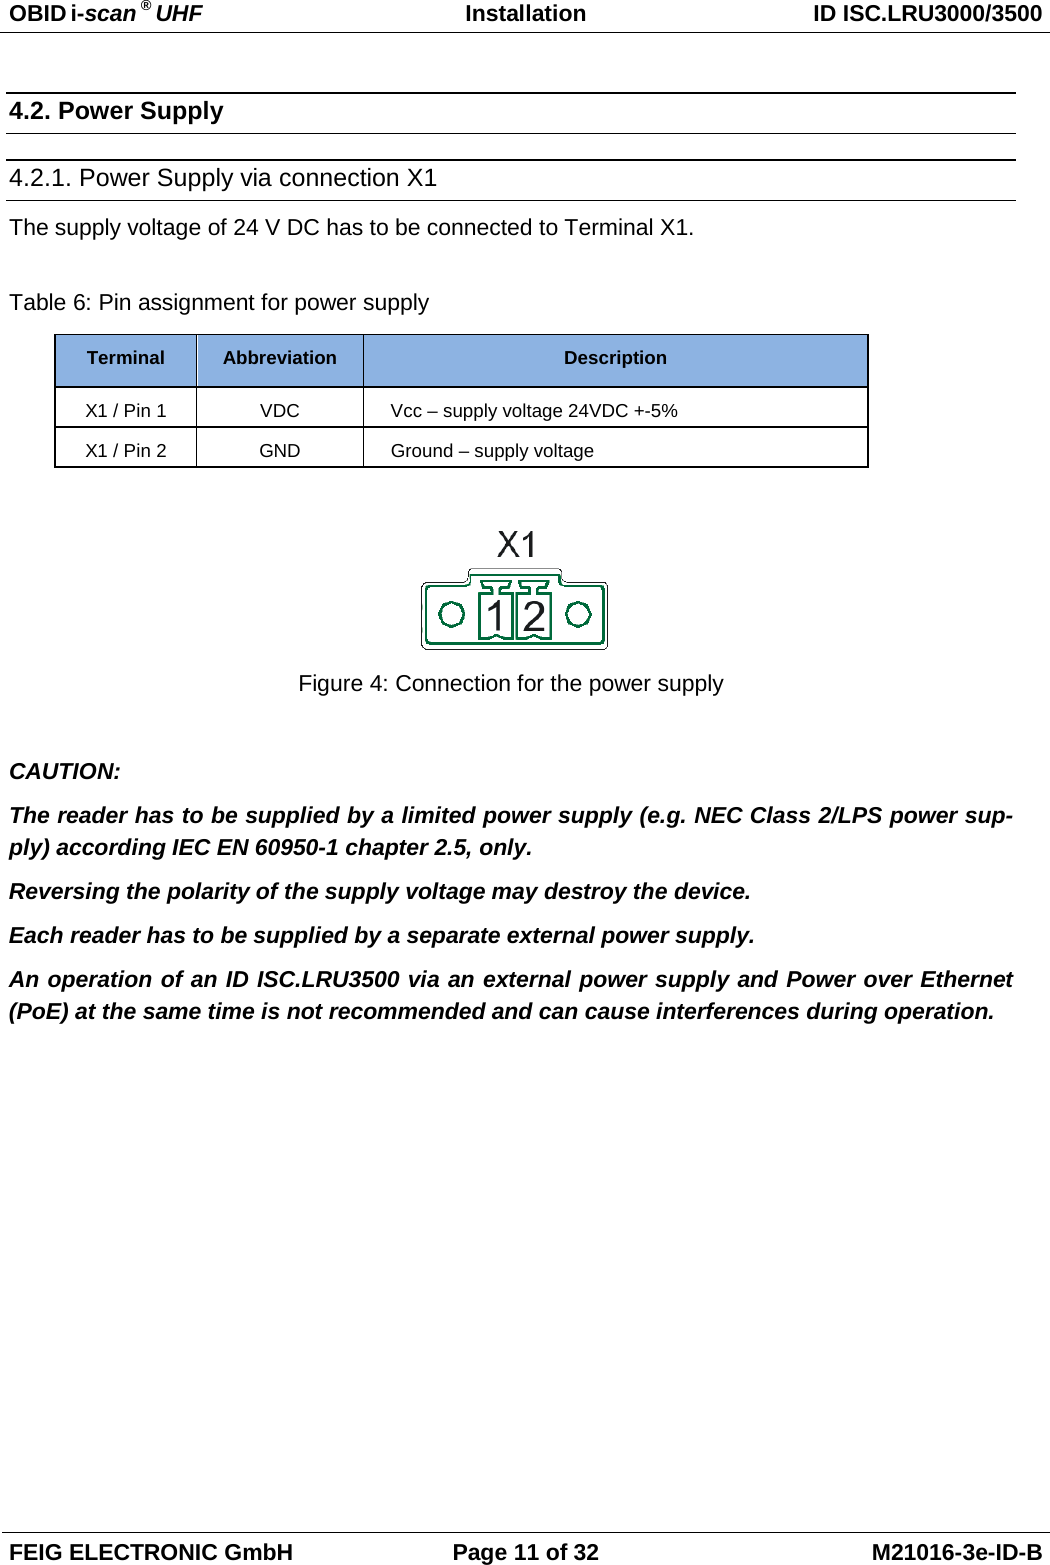 OBID i-scan ® UHF Installation ID ISC.LRU3000/3500  FEIG ELECTRONIC GmbH Page 11 of 32 M21016-3e-ID-B  4.2. Power Supply 4.2.1. Power Supply via connection X1 The supply voltage of 24 V DC has to be connected to Terminal X1.  Table 6: Pin assignment for power supply Terminal Abbreviation Description X1 / Pin 1 VDC Vcc – supply voltage 24VDC +-5% X1 / Pin 2 GND Ground – supply voltage   Figure 4: Connection for the power supply  CAUTION: The reader has to be supplied by a limited power supply (e.g. NEC Class 2/LPS power sup-ply) according IEC EN 60950-1 chapter 2.5, only. Reversing the polarity of the supply voltage may destroy the device. Each reader has to be supplied by a separate external power supply. An operation of an ID ISC.LRU3500 via an external power supply and Power over Ethernet (PoE) at the same time is not recommended and can cause interferences during operation.  